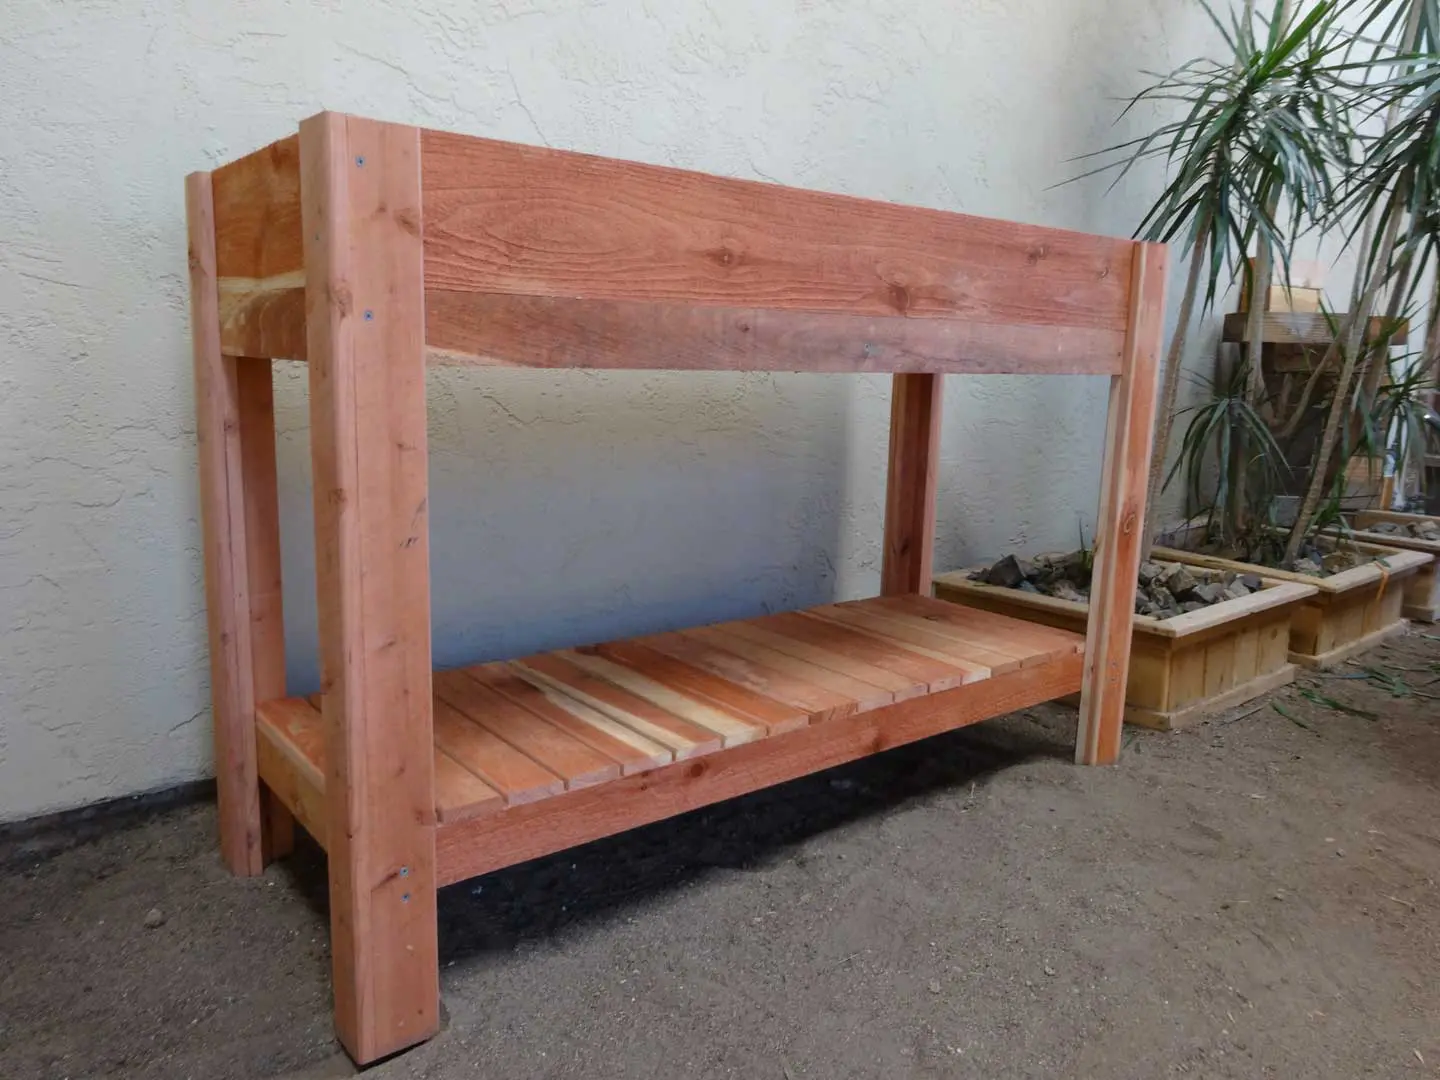 A wooden bunk bed with two levels and a plant in the corner.